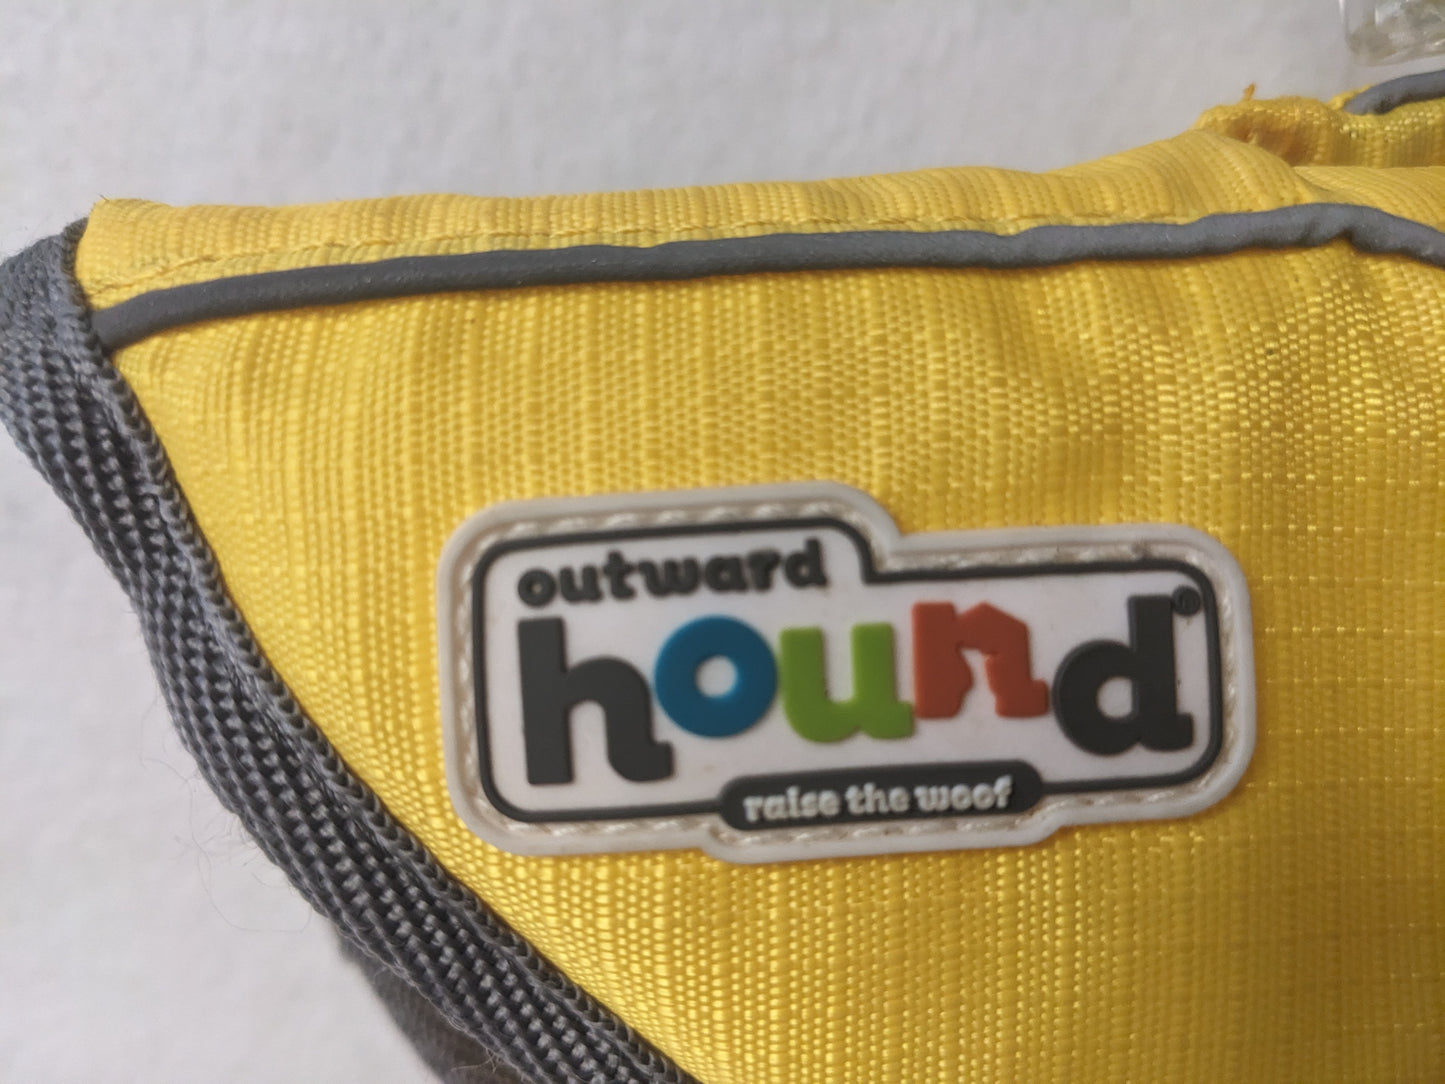 Hound Dog Floatation Jacket Size Small Color Yellow Condition Used